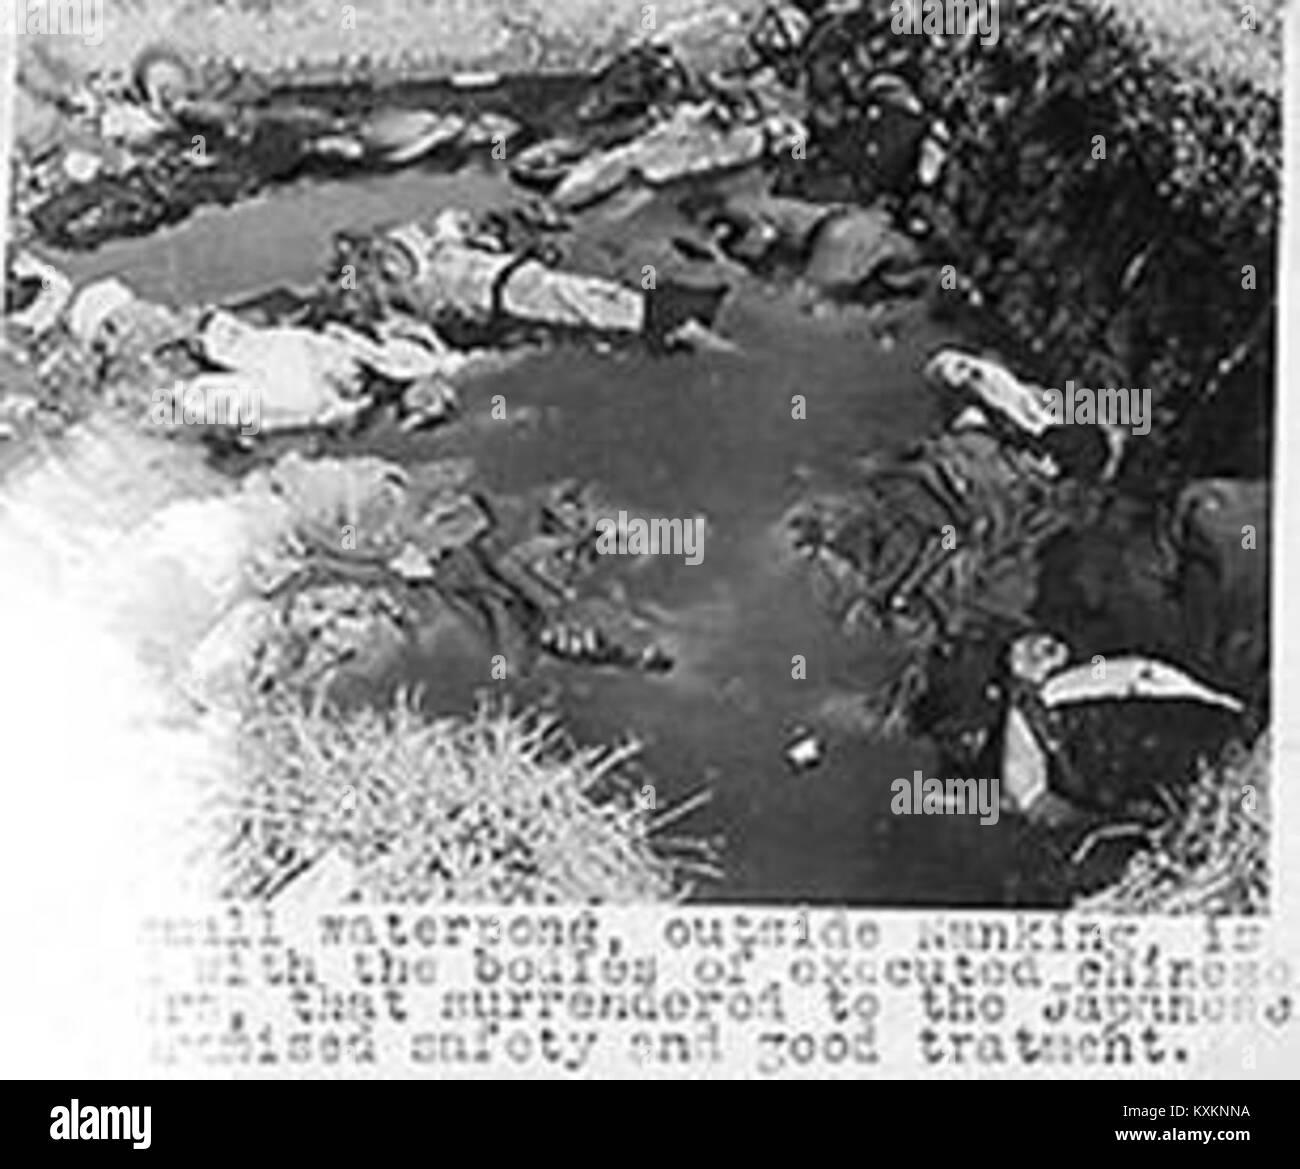 A waterpond filled with the bodies of executed Chinese soldiers who got safety promise by Japanese (a), Nanjing Massacre Stock Photo